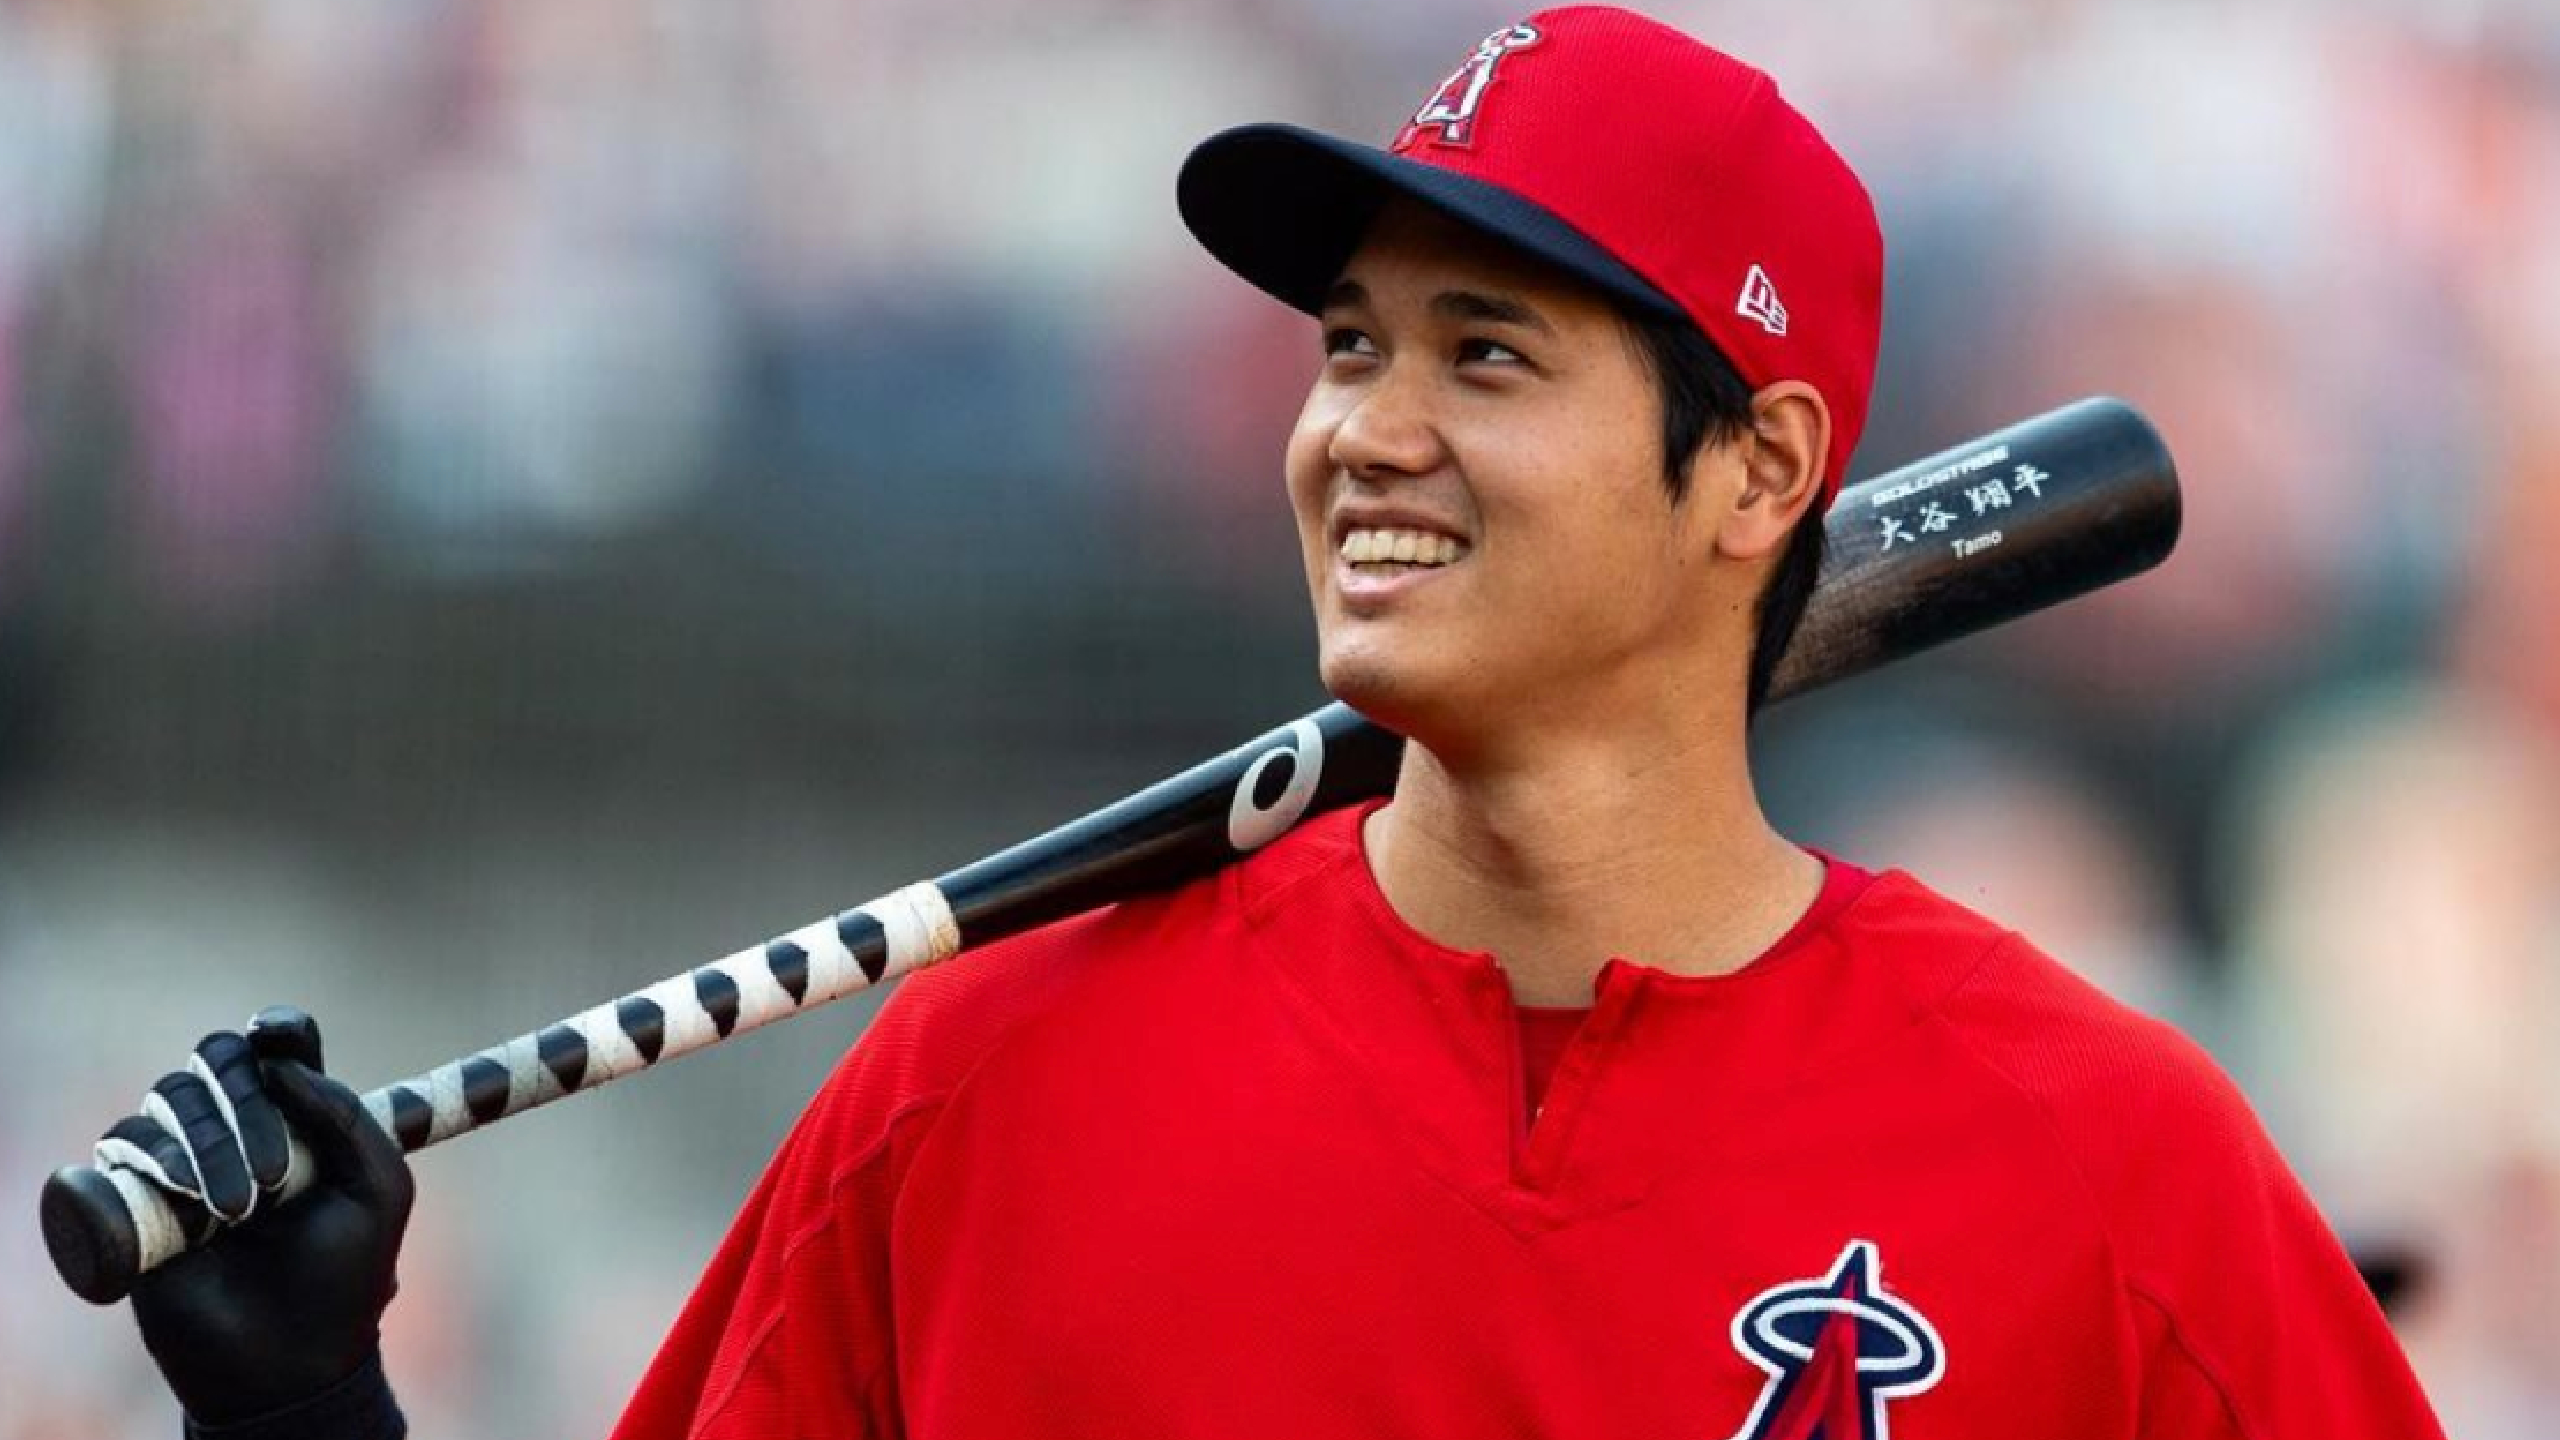 Angels' Shohei Ohtani announces his plans, delivers first All-Star